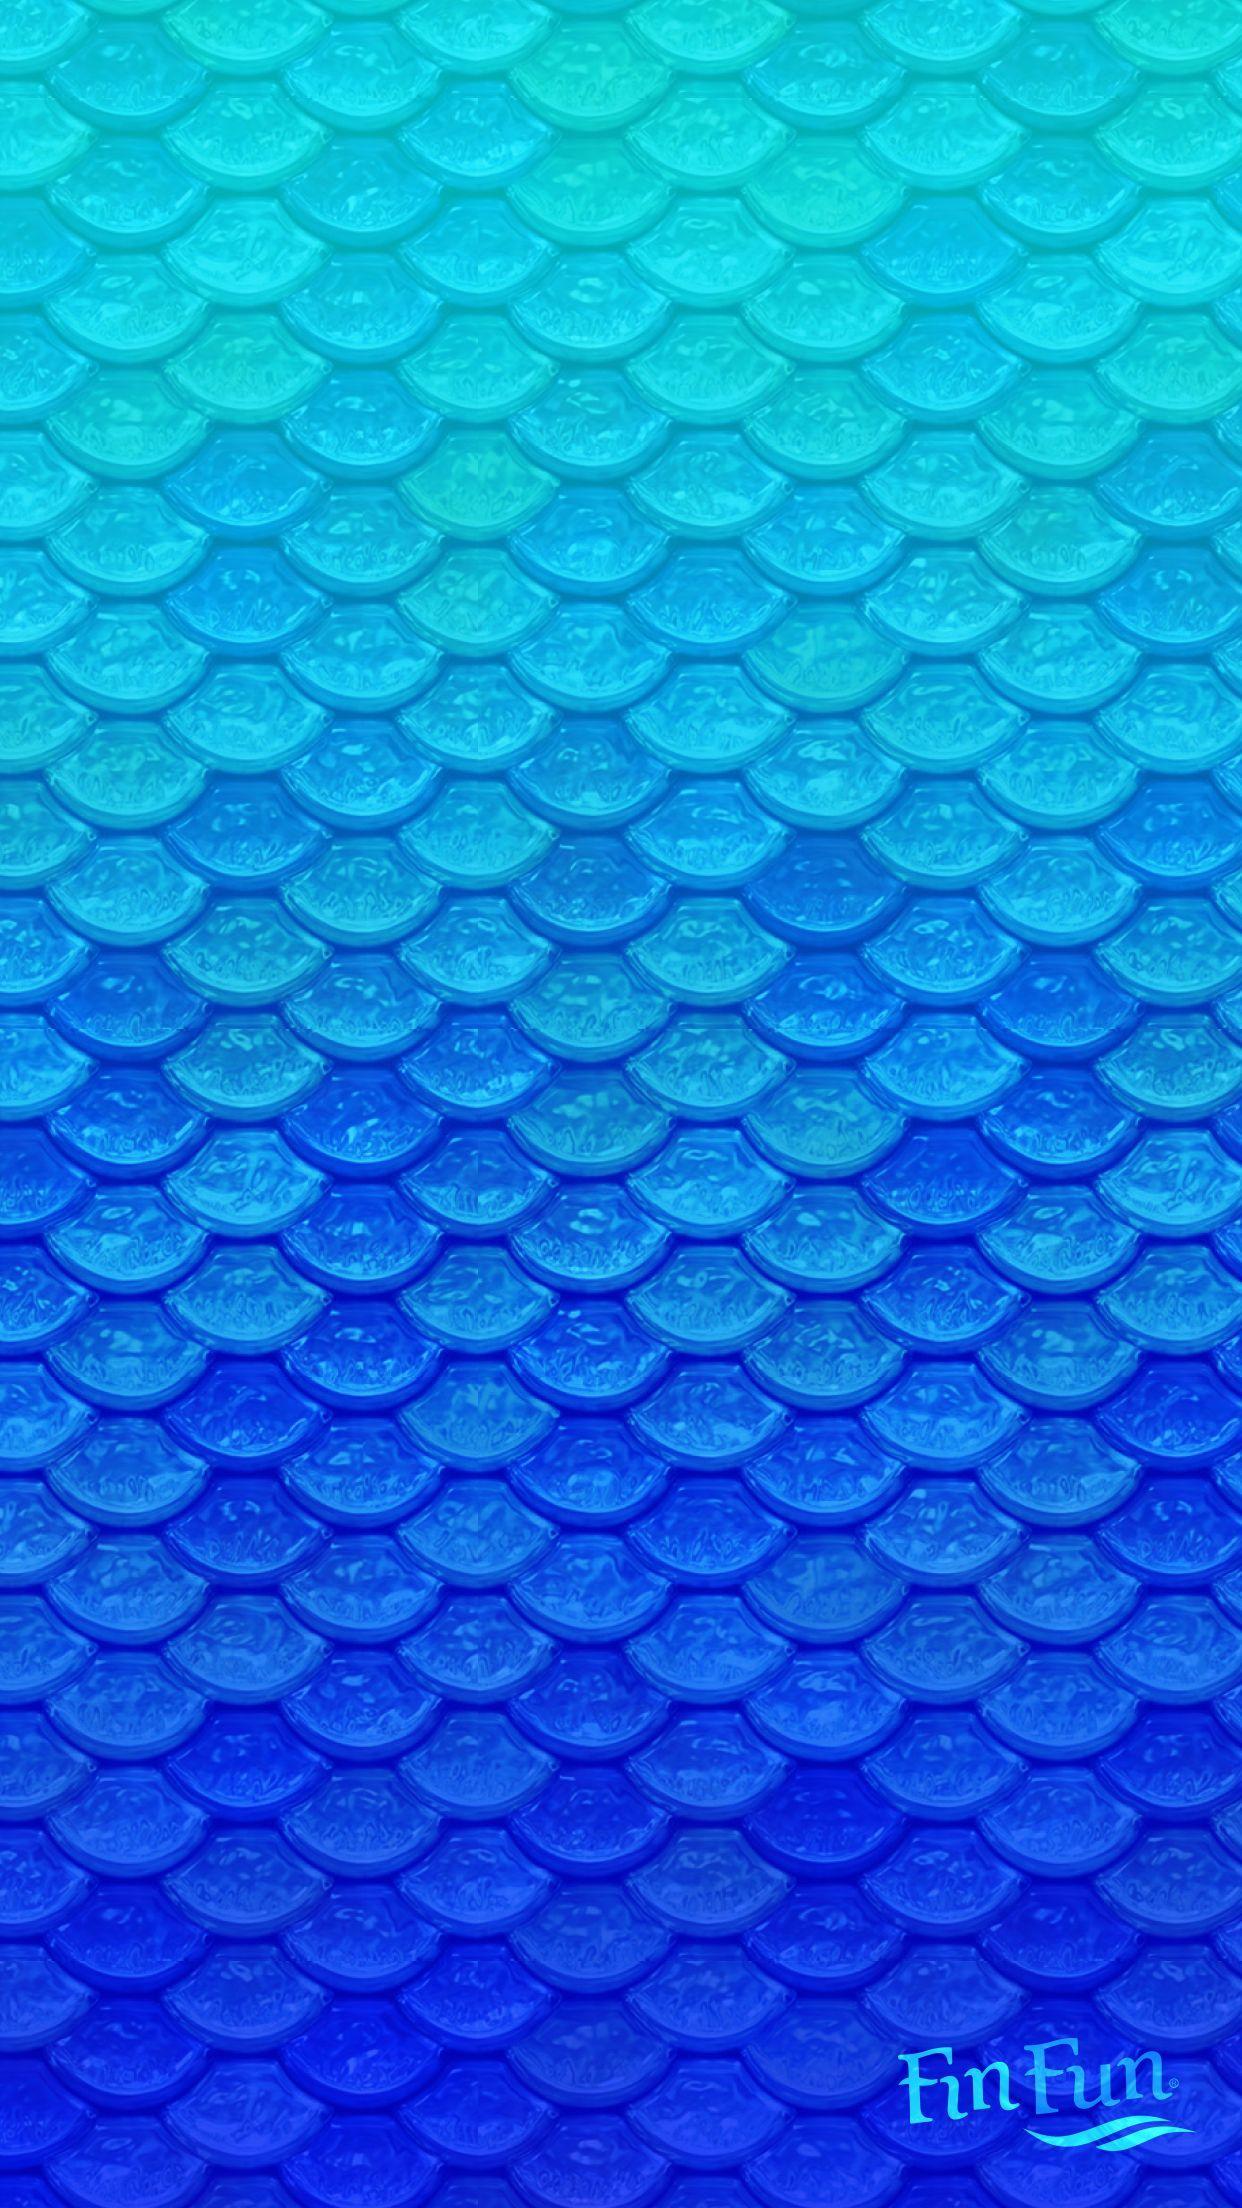 Mermaid scale wallpaper for your phone or tablet. Download similar